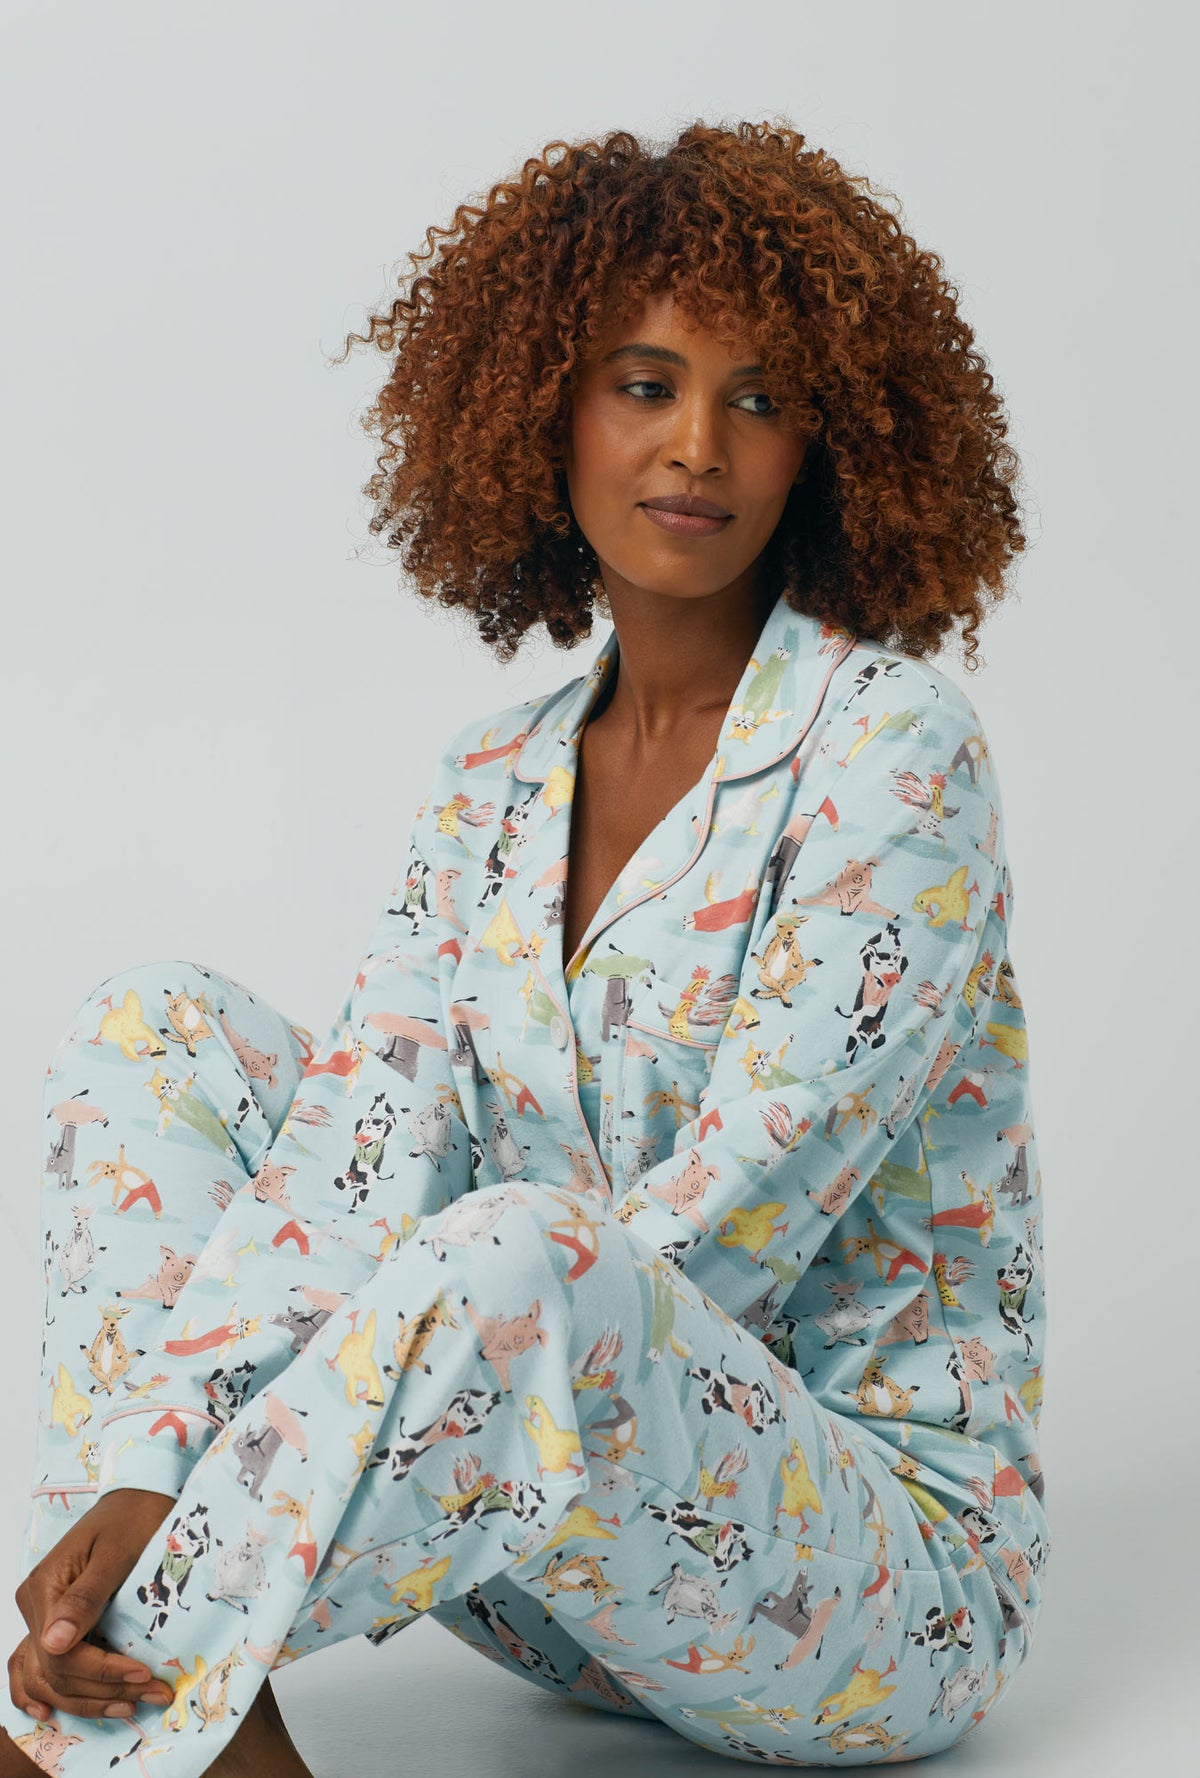 Mr Turk Delivers Colorful Sleepwear with BedHead Pajamas – The